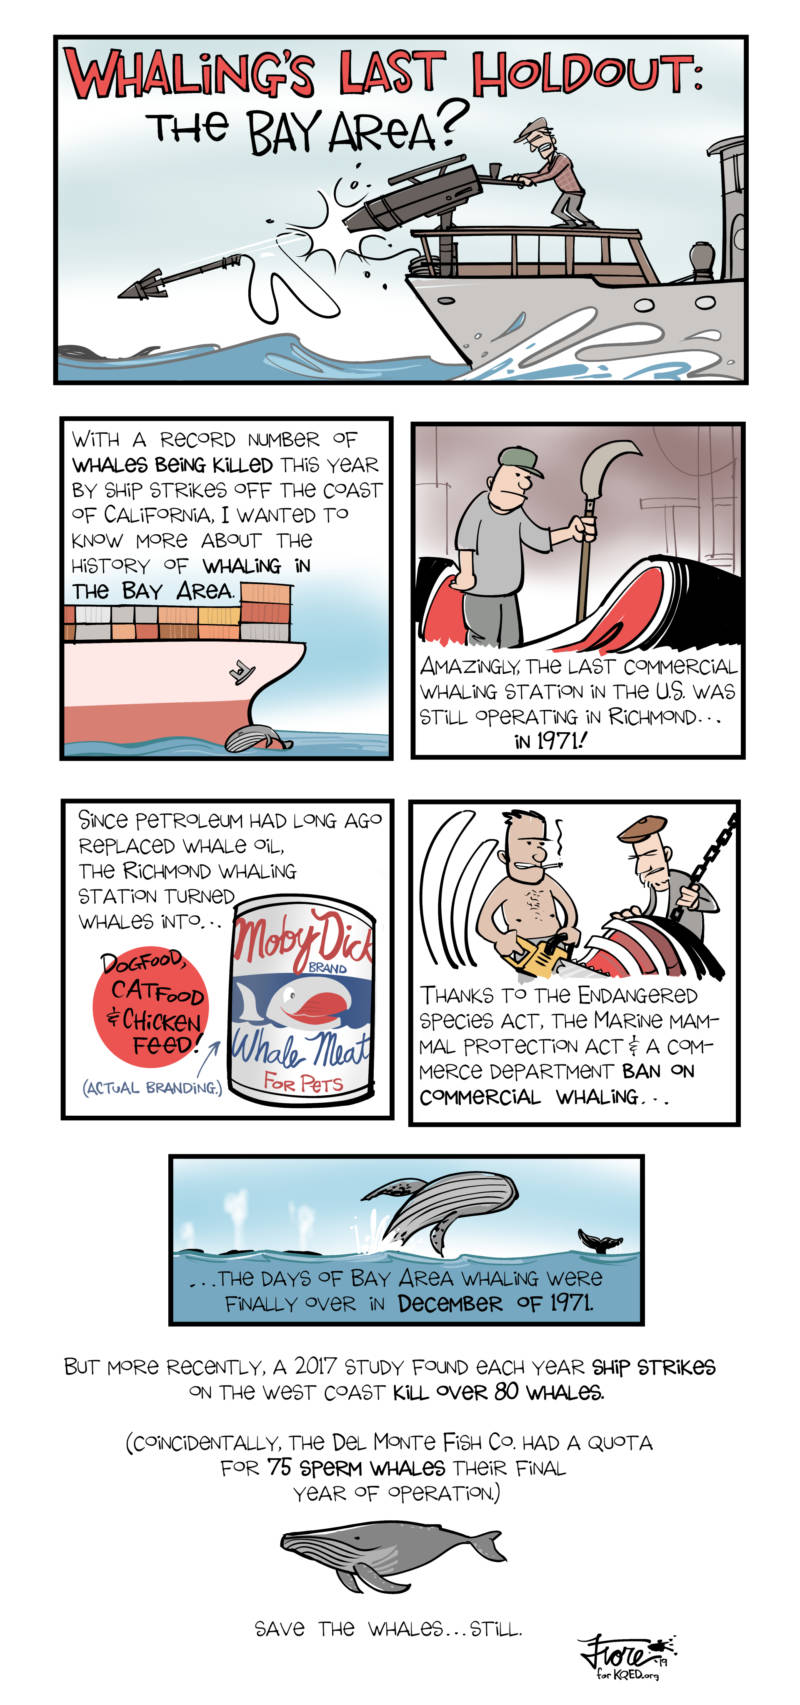 Whaling's Last Holdout: The Bay Area by Mark Fiore